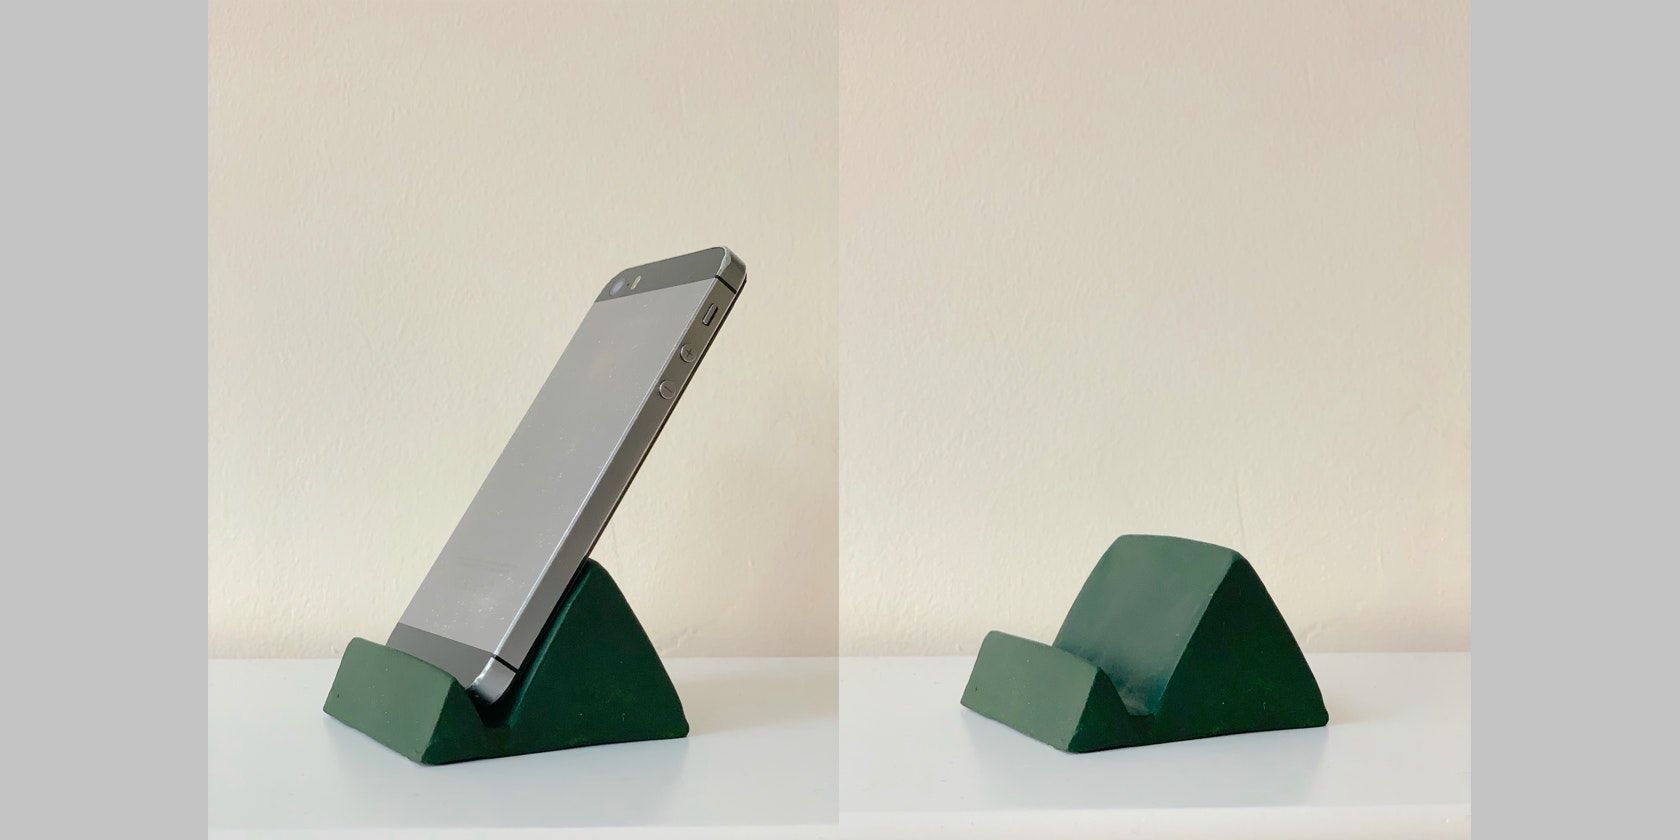 Two images of a green triangle shape phone stand showing it with and without an iPhone